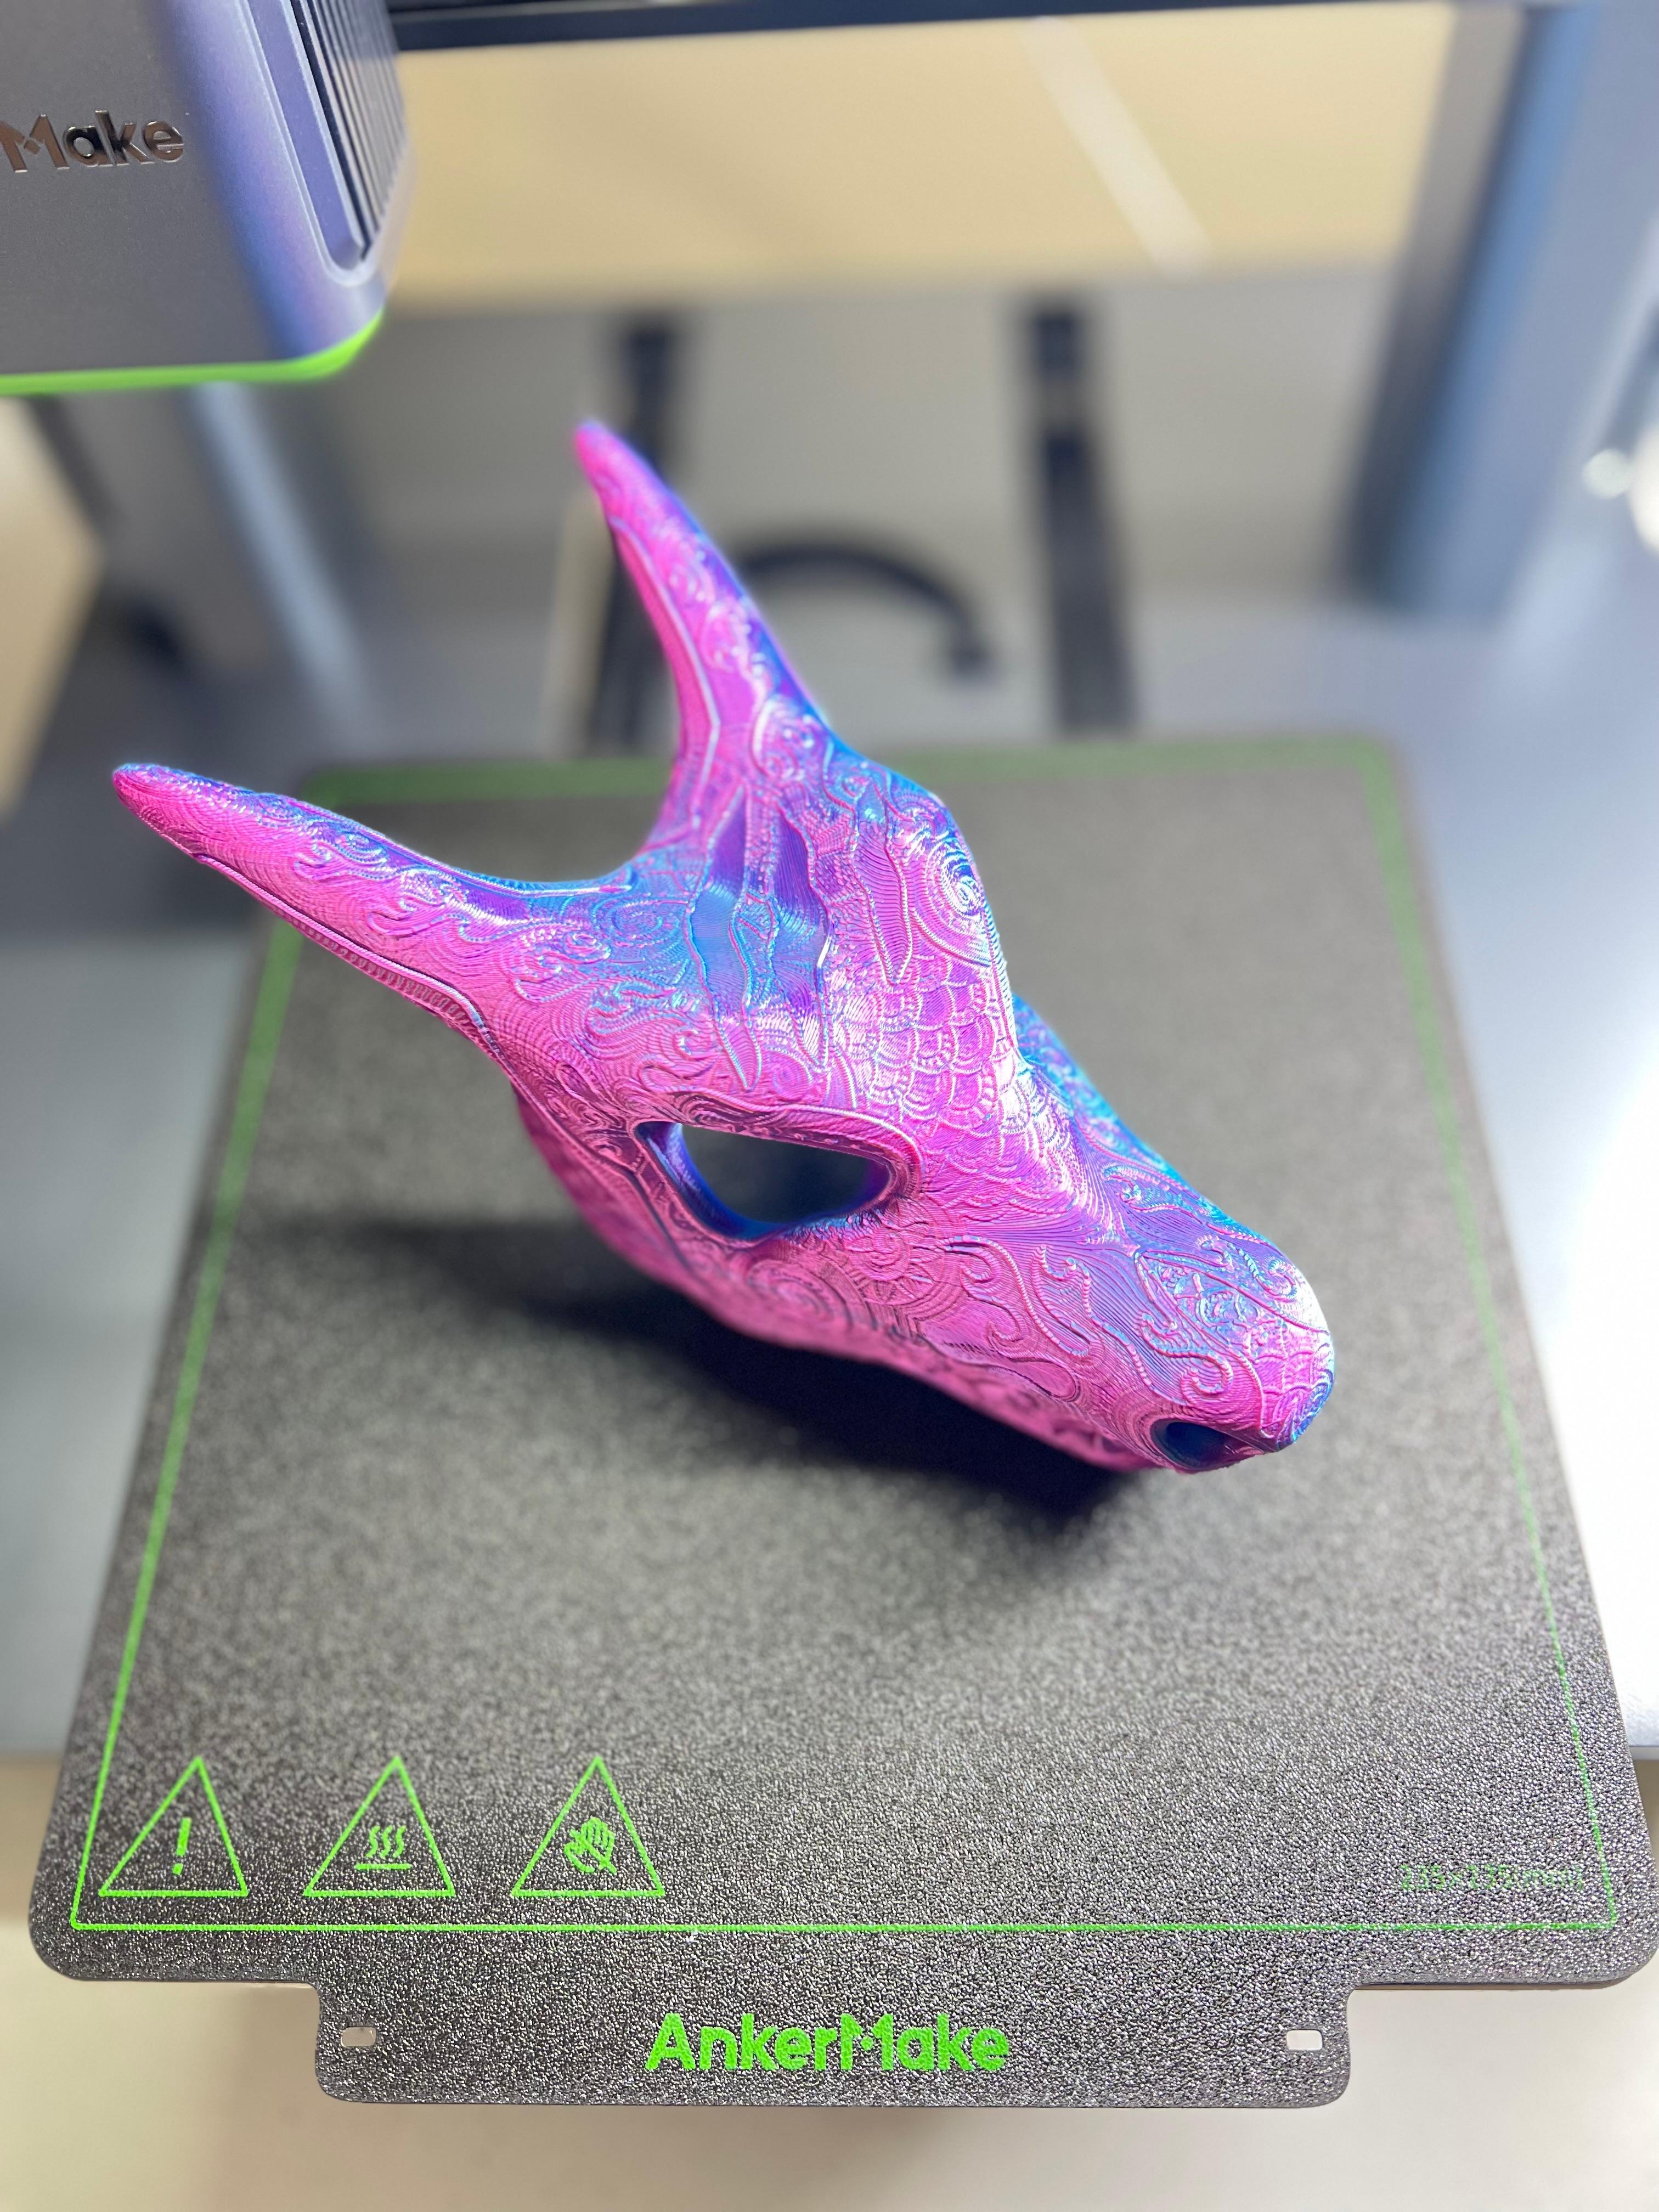 Ornate Charizard Skull (Pokémon) - Had to print this and it printed amazingly!! Used supports on build plate. Printed on AnkerMake M5 using Prusa Slicer. Check me out on TikTok @LyteTec - 3d model